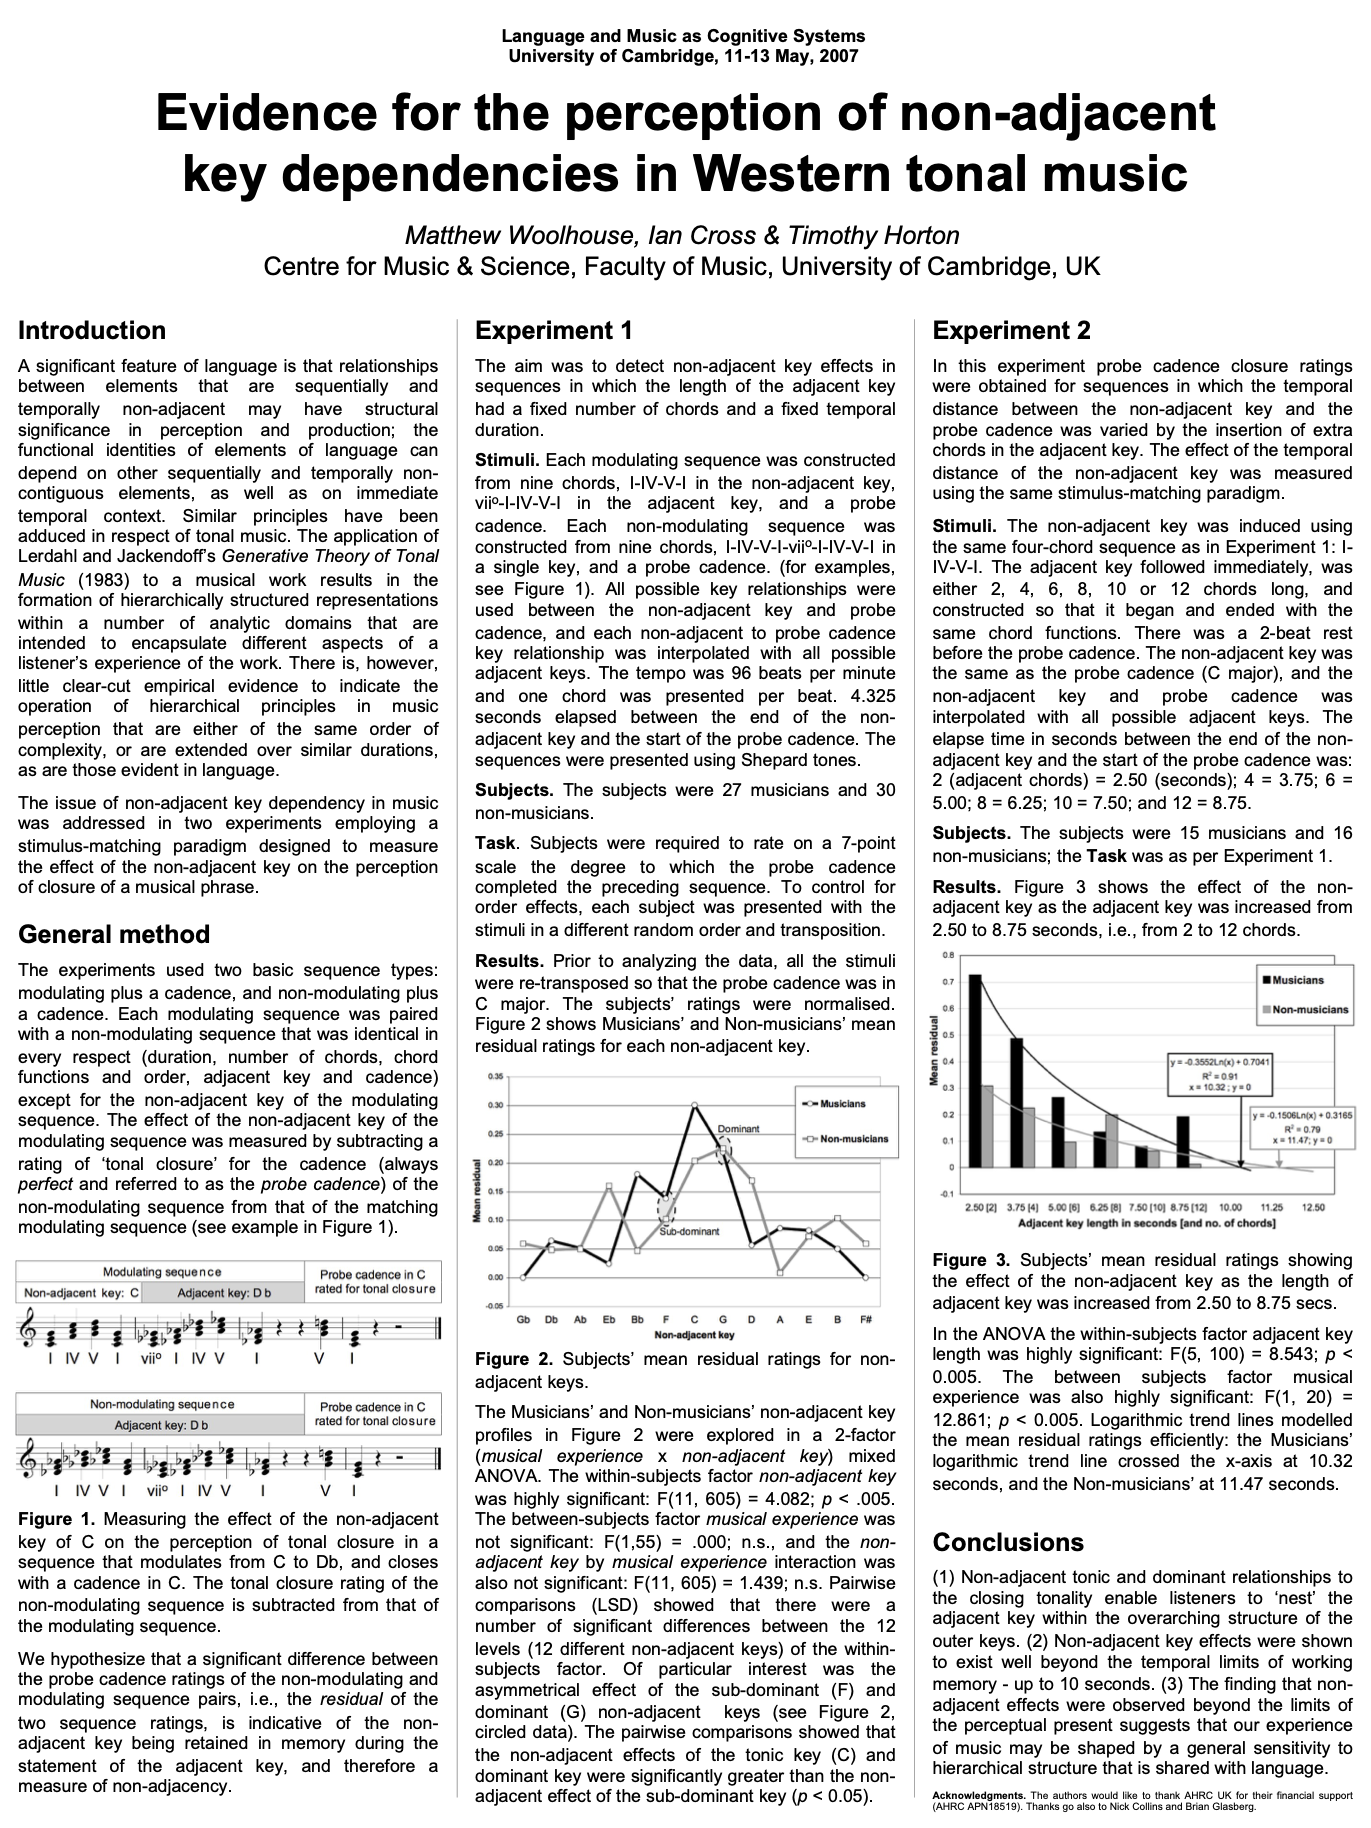 Poster for "Evidence for the perception of non-adjacent key dependencies in Western tonal music" by Matthew Woolhouse, Ian Cross, and Timothy Horton.